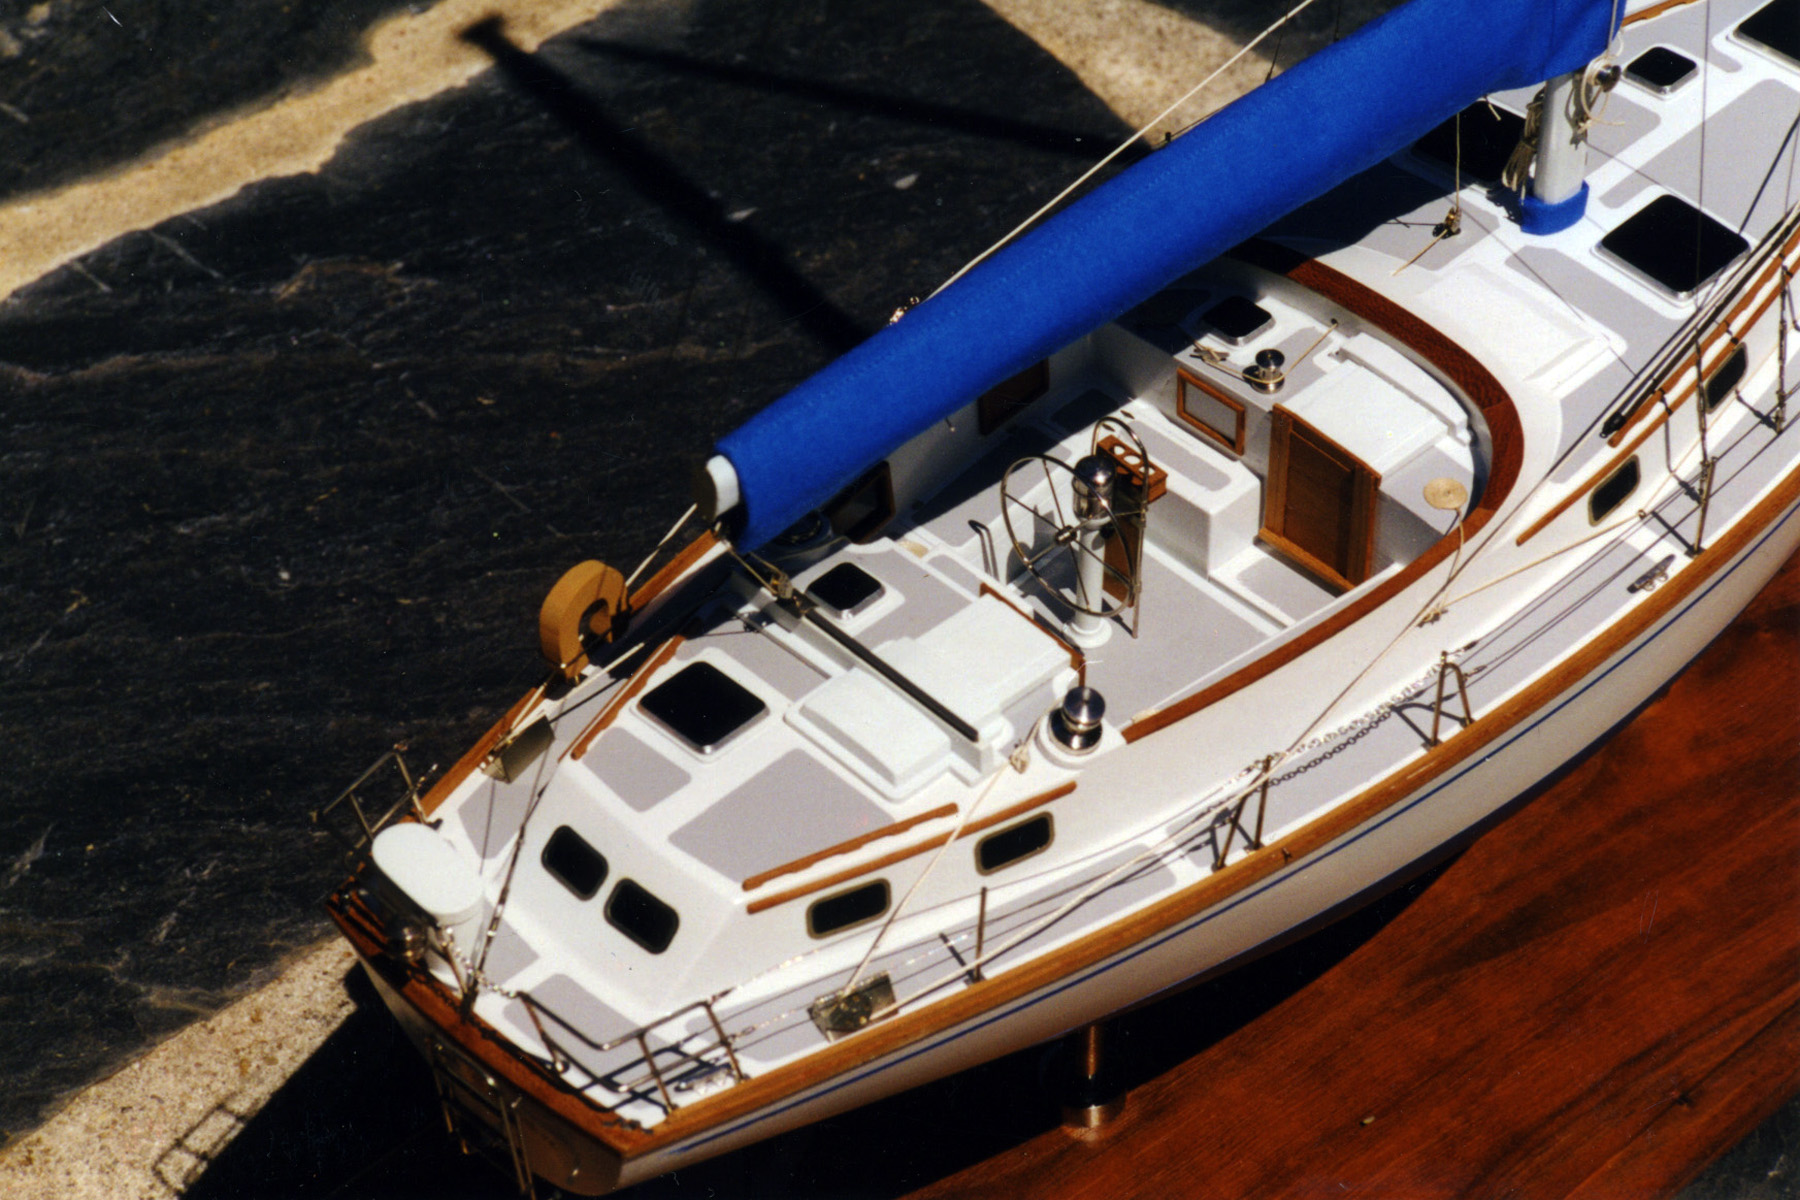 Model of sailboat 'Rachel Carson' - view of cockpit from above, starboard quarter